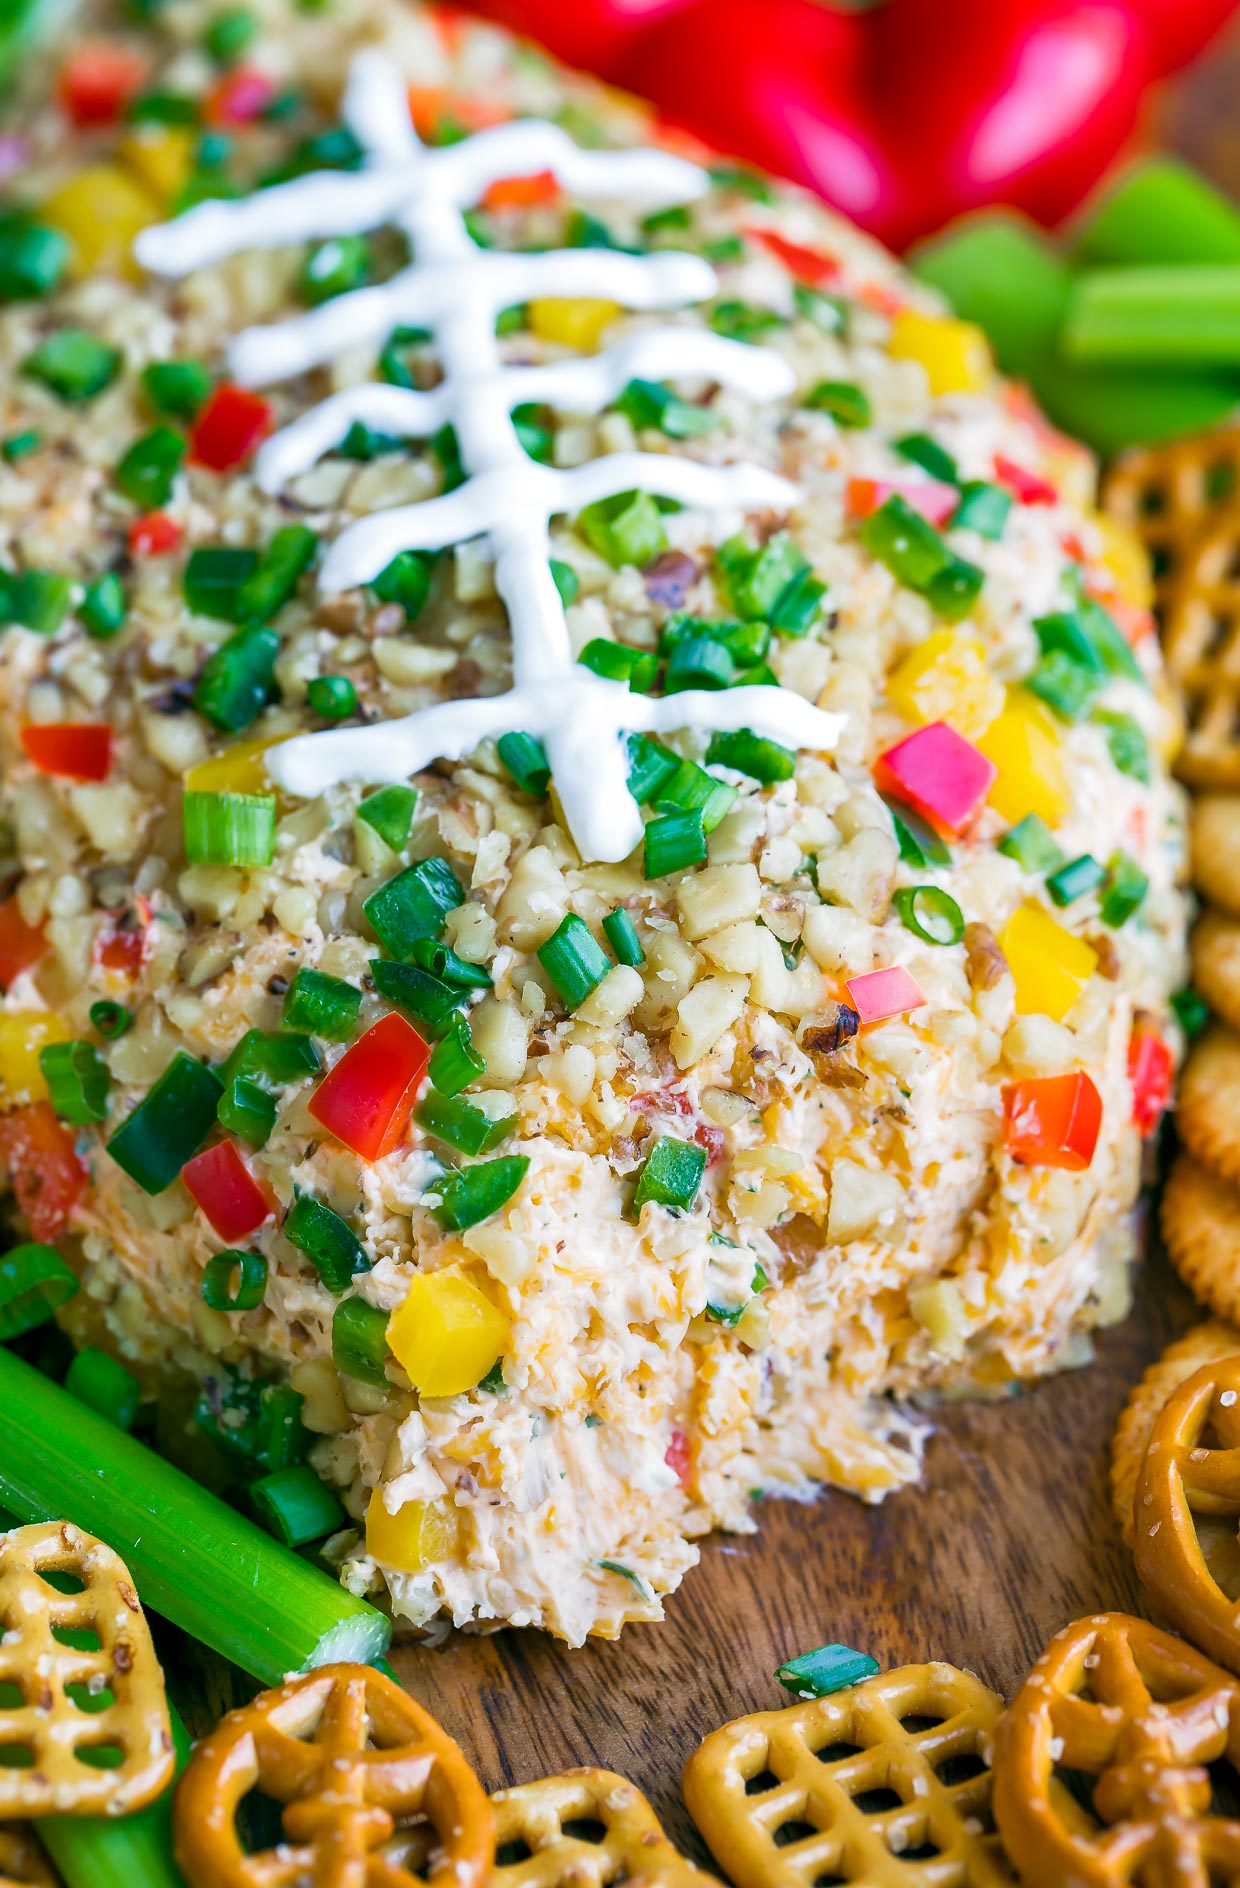 You're guaranteed touchdown status at your next game day party with this Buffalo Ranch Football Cheese Ball! This crazy easy appetizer can be made in advance and is portable and DELICIOUS!